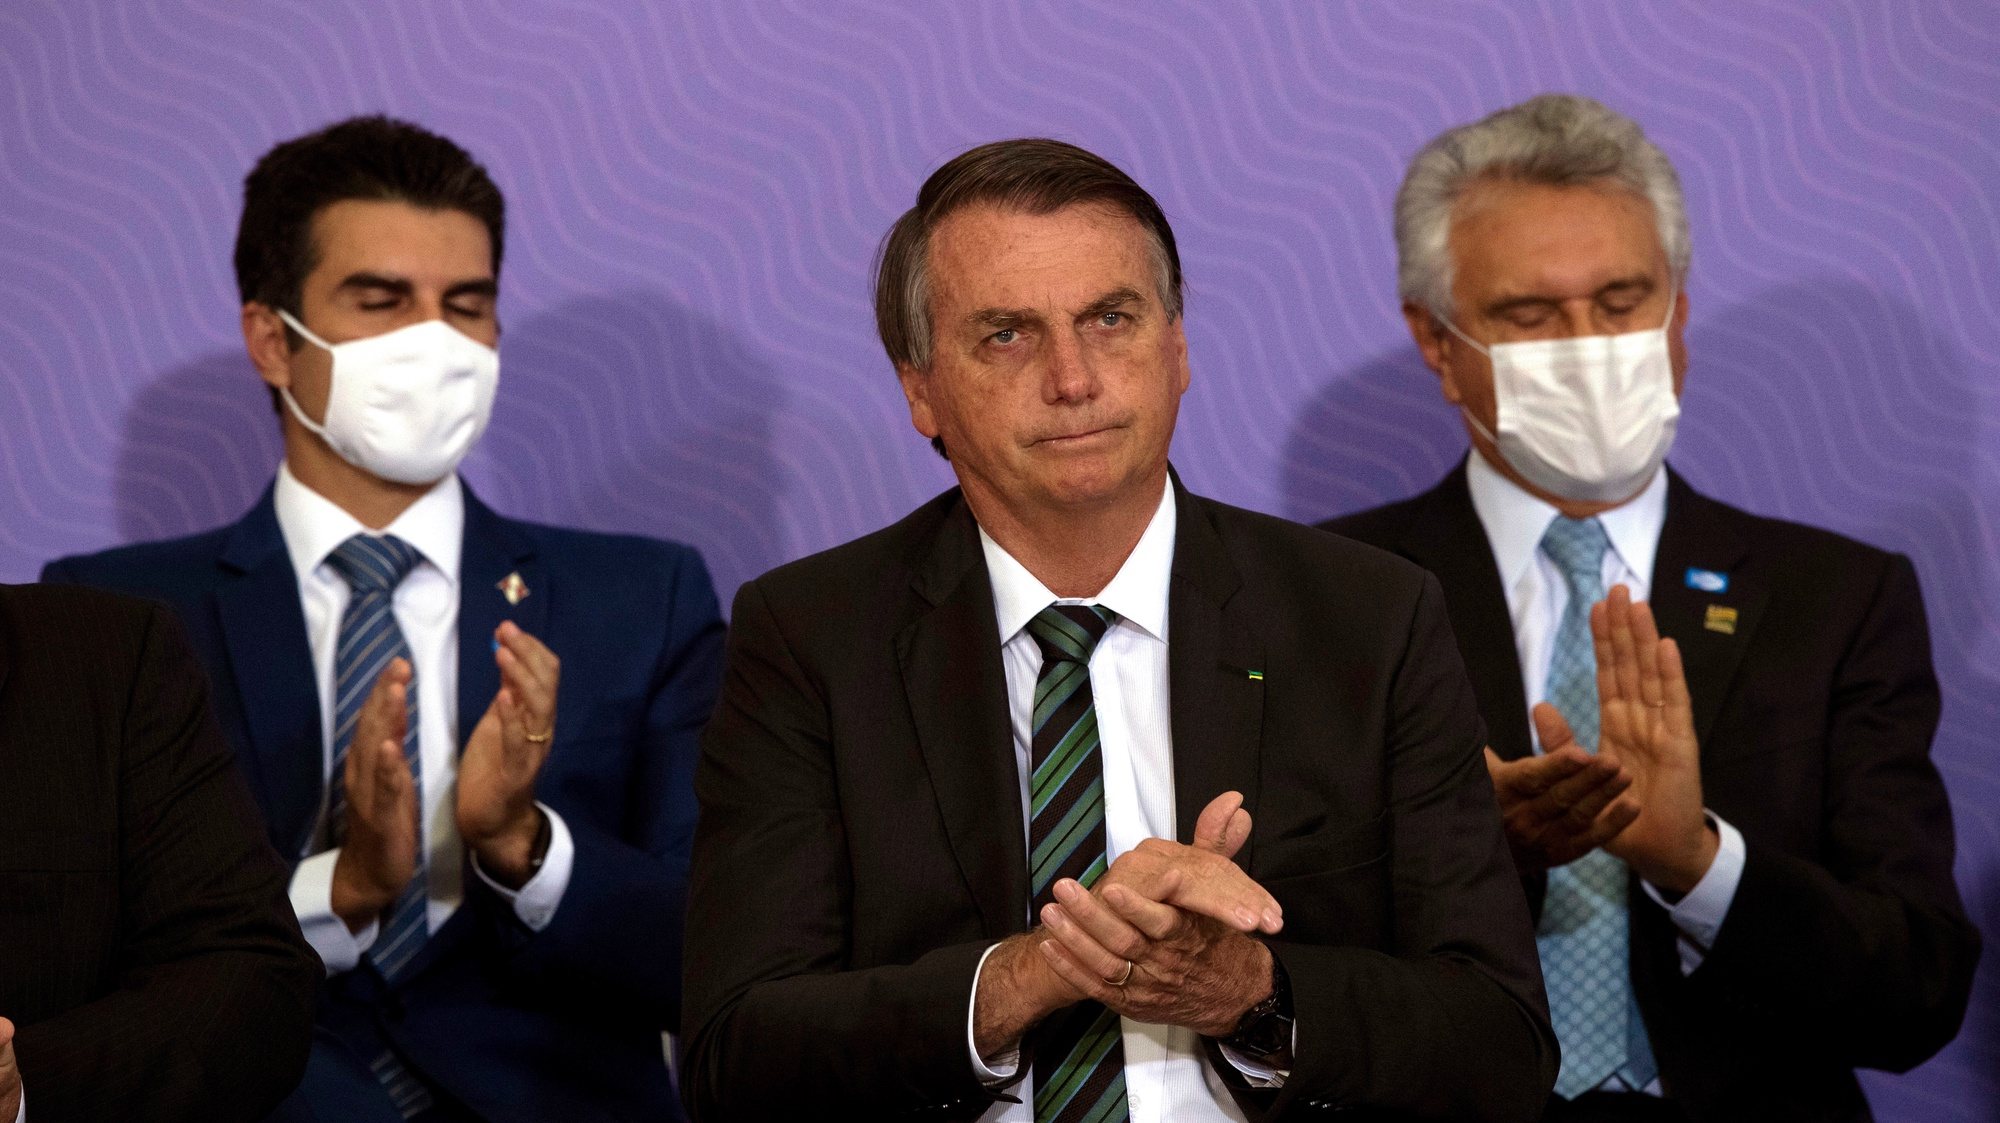 epa08887787 Brazilian President Jair Bolsonaro (C) applauds during the launch of the National Vaccination Plan against covid-19, at the Planalto Palace in Brasilia, Brazil, 16 December 2020. The Brazilian Government presented the master lines of its future vaccination plan against covid-19, which plans to immunize 210 million inhabitants in about 16 months, but has not yet set a start date for the process. According to the Ministry of Health, to establish the day on which the first of the five planned vaccination phases will begin, one must wait for an vaccine to be approved and registered by the National Health Surveillance Agency (Anvisa), which could occur for next February.  EPA/Joedson Alves